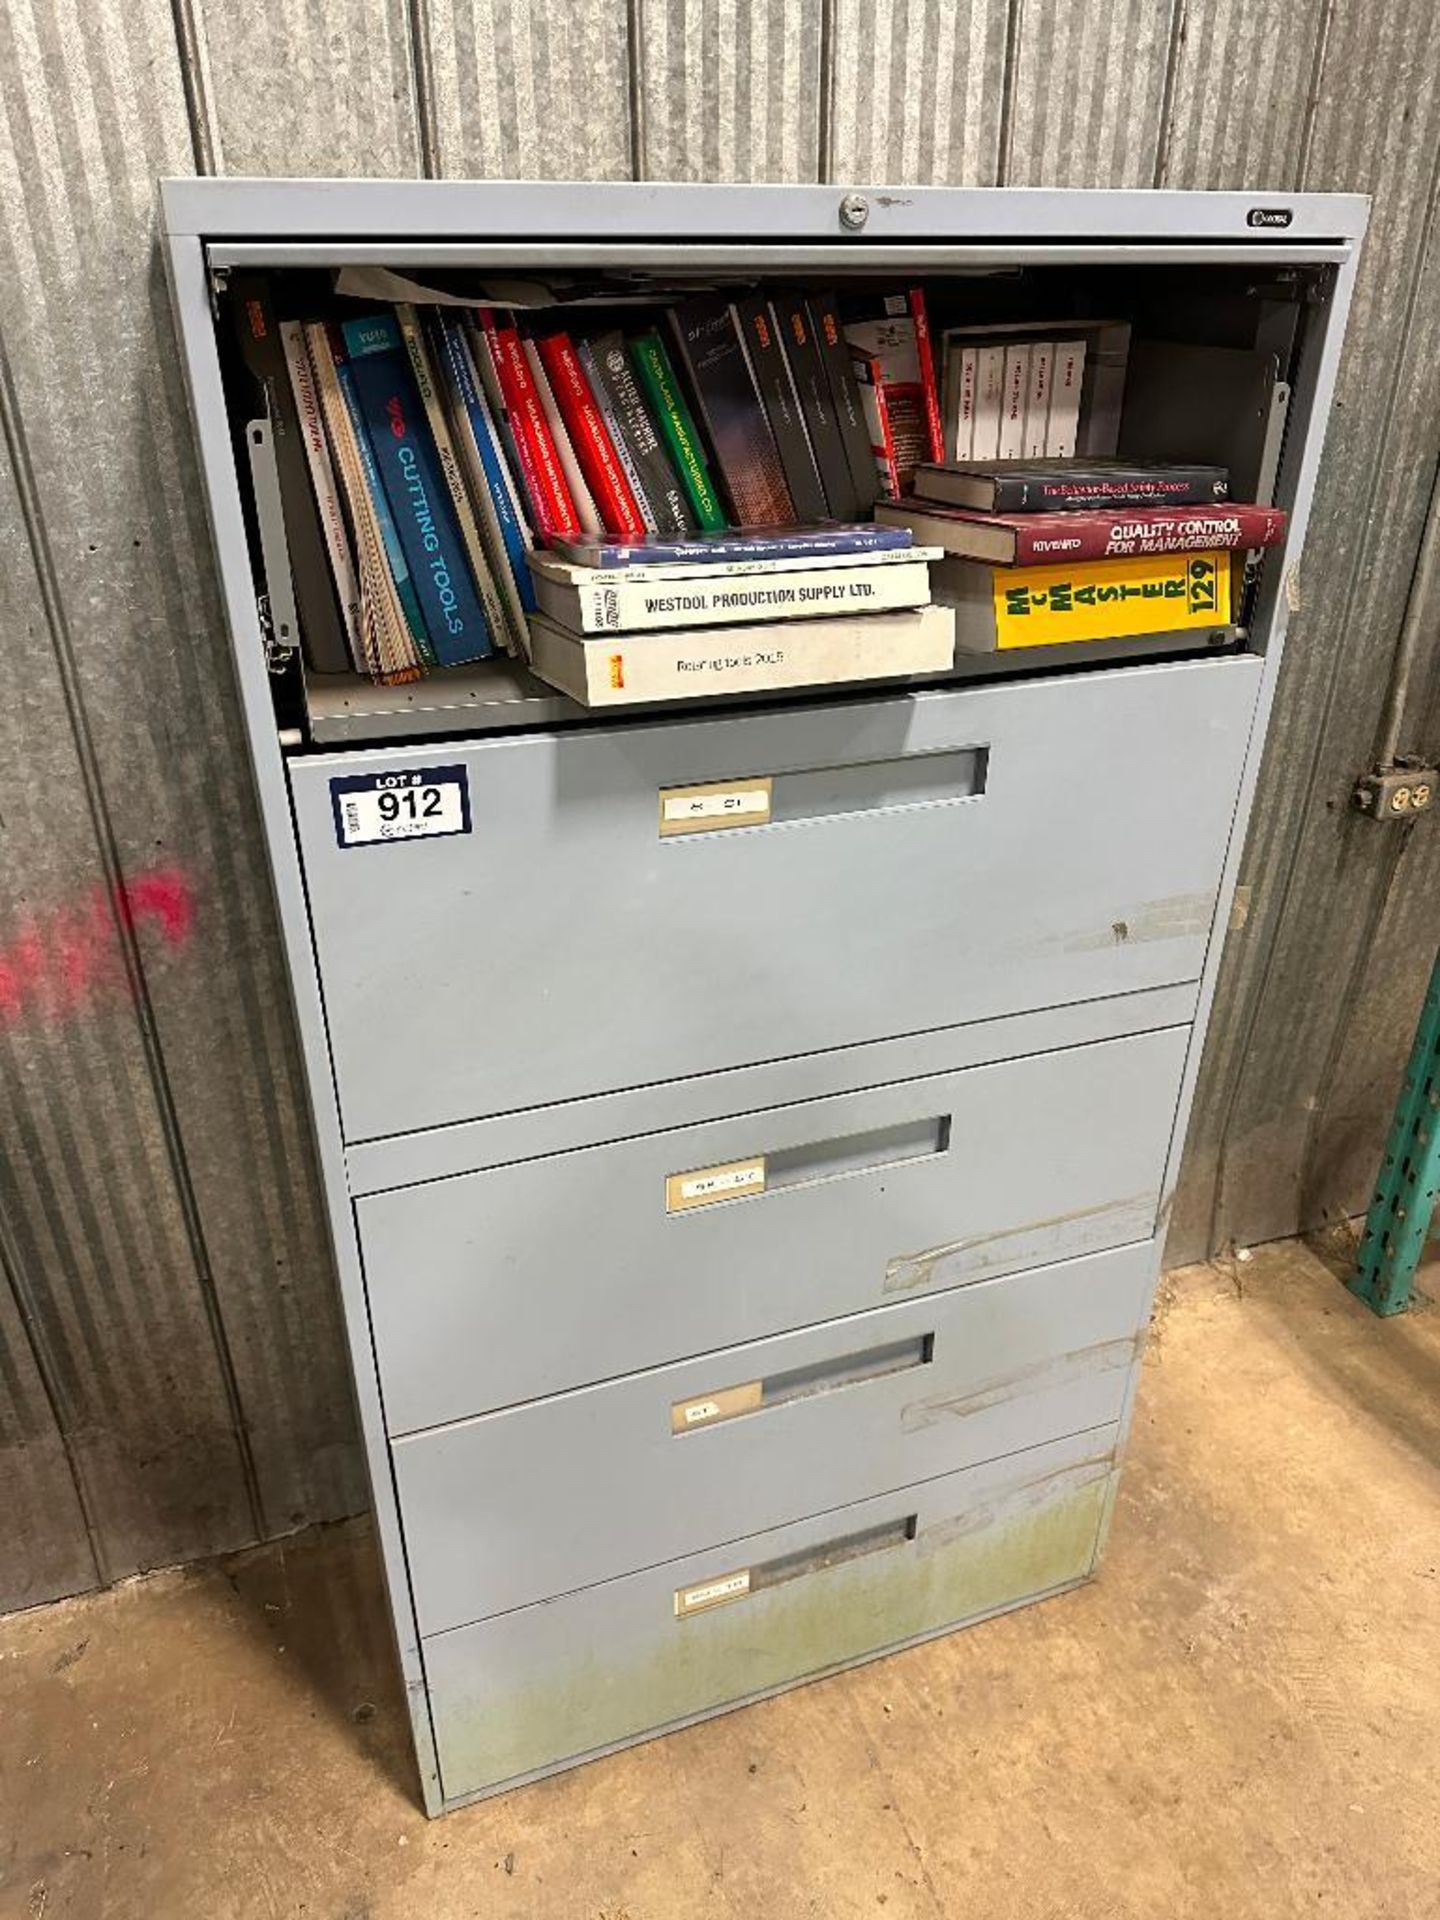 4-Drawer Lateral Filing Cabinet w/ Asst. Tool Catalogues, Manuals, etc.